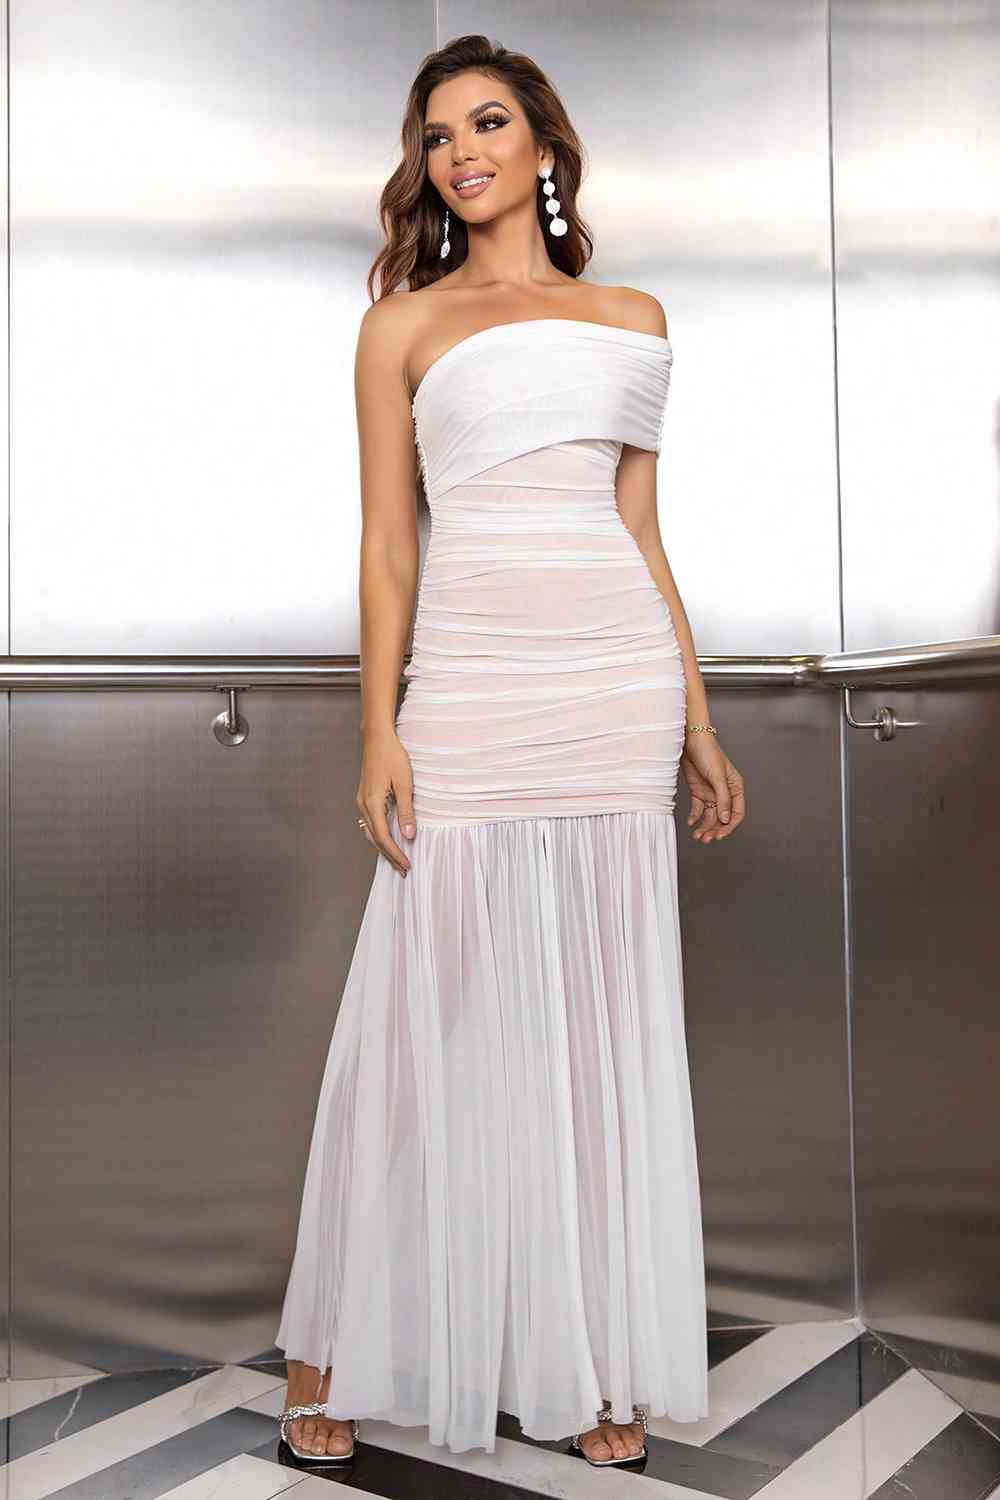 One-Shoulder Ruched Maxi Dress - White / XS - All Dresses - Dresses - 13 - 2024